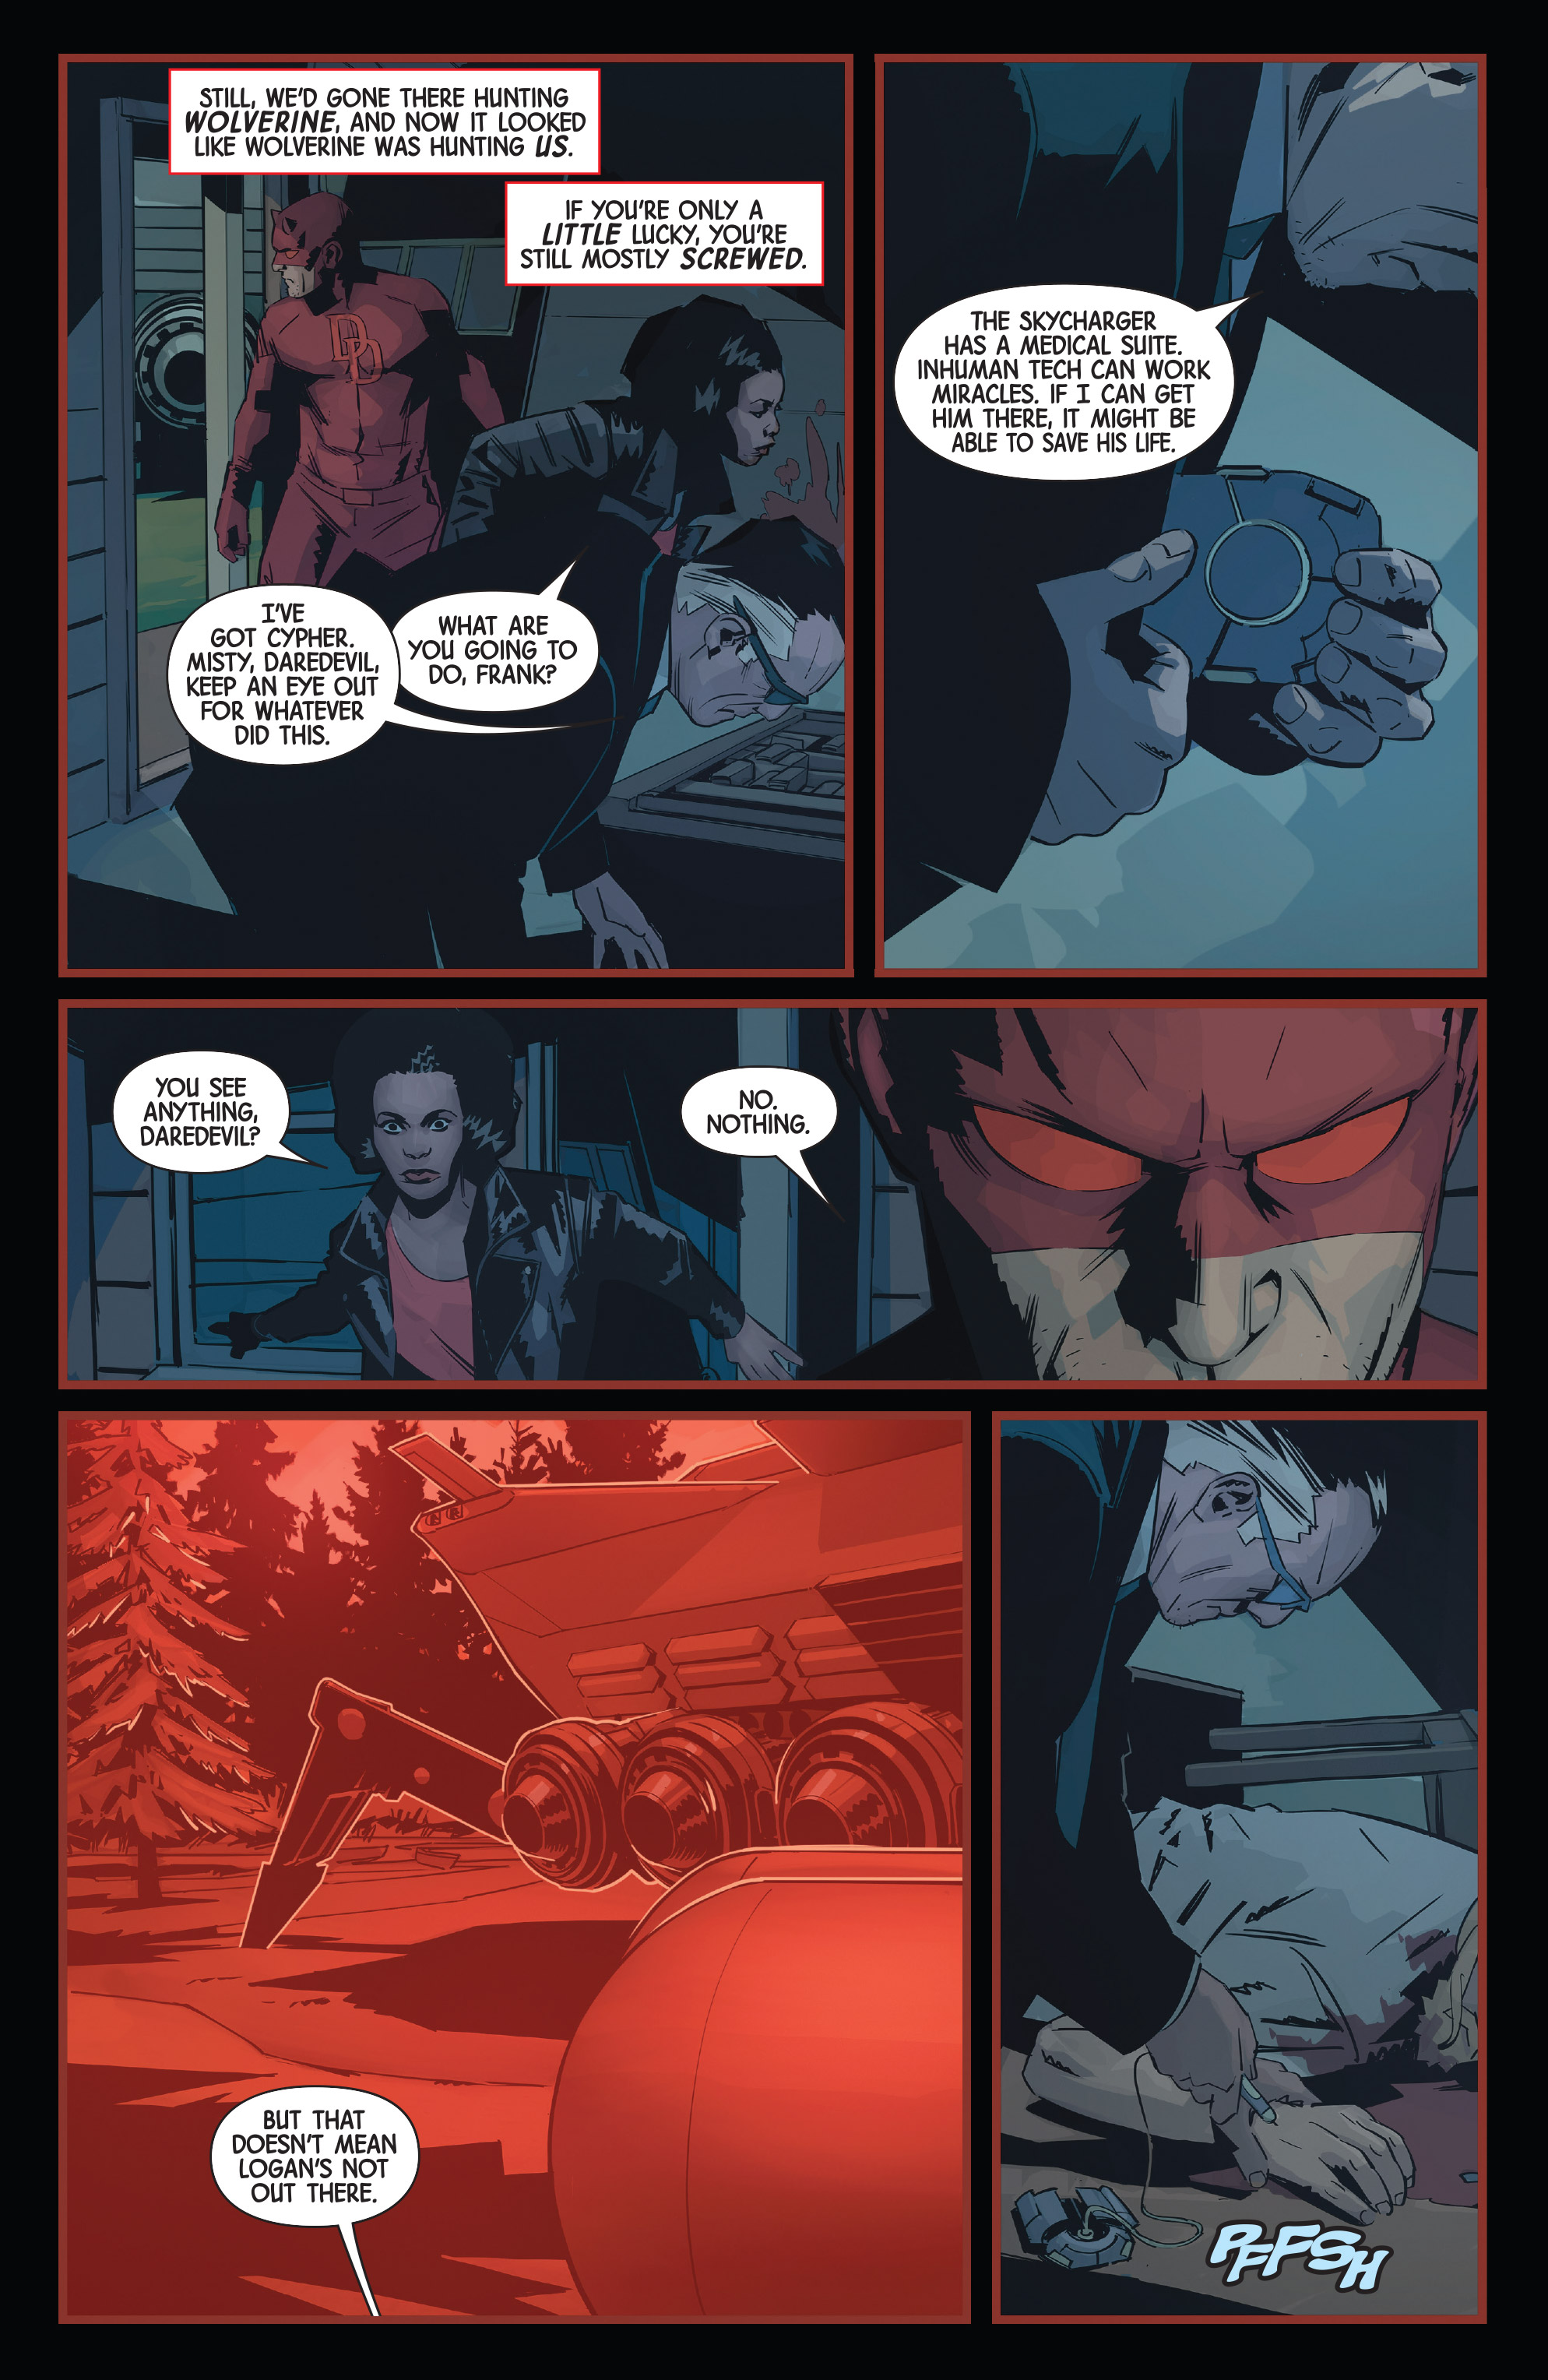 Hunt For Wolverine: Weapon Lost (2018): Chapter 3 - Page 4